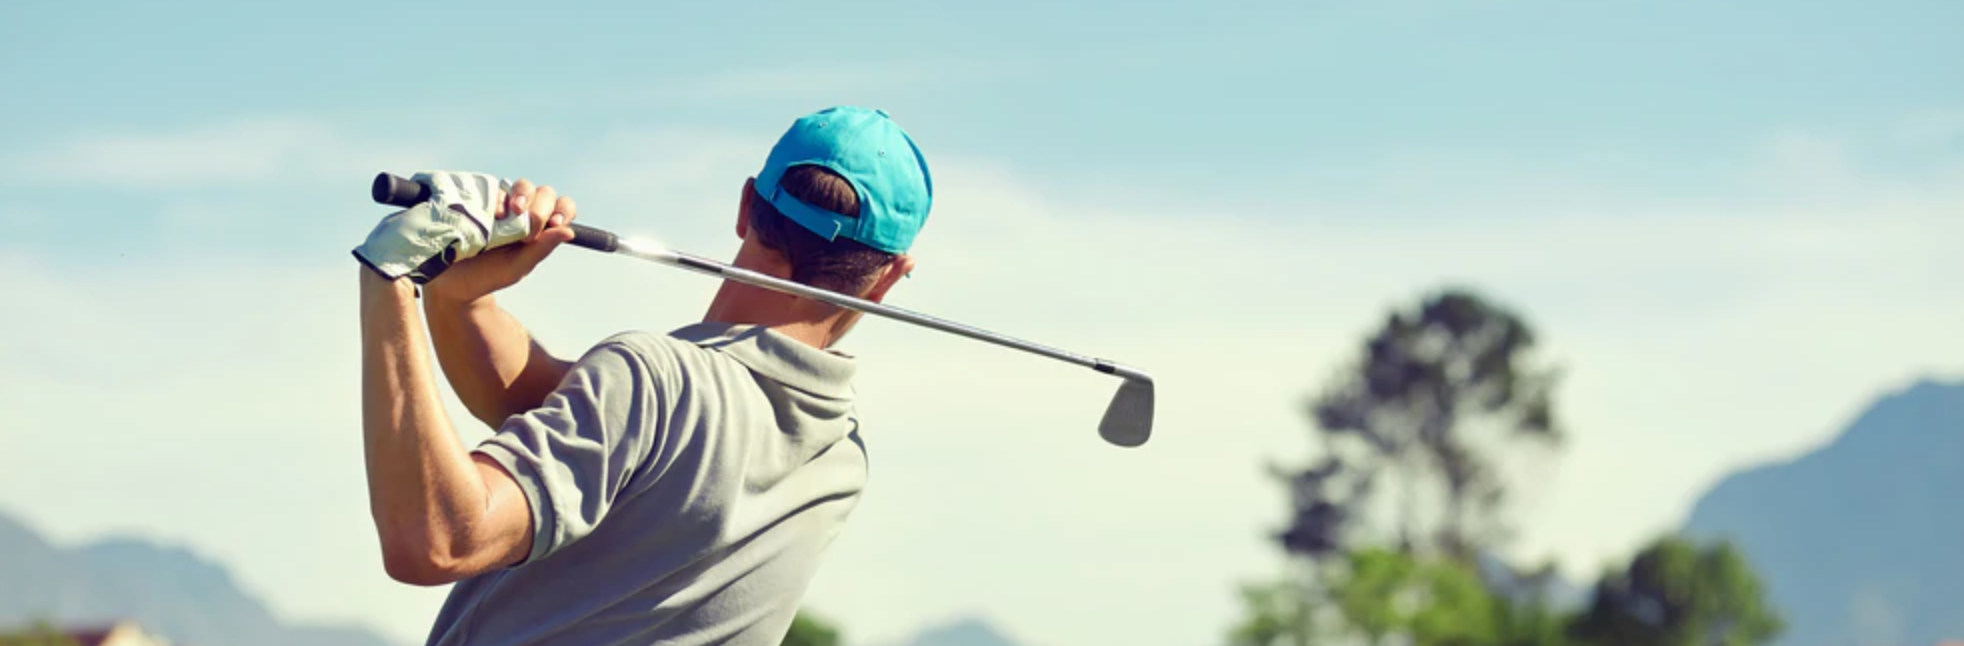 5 Functional Exercises Every Golfer Should Be Doing